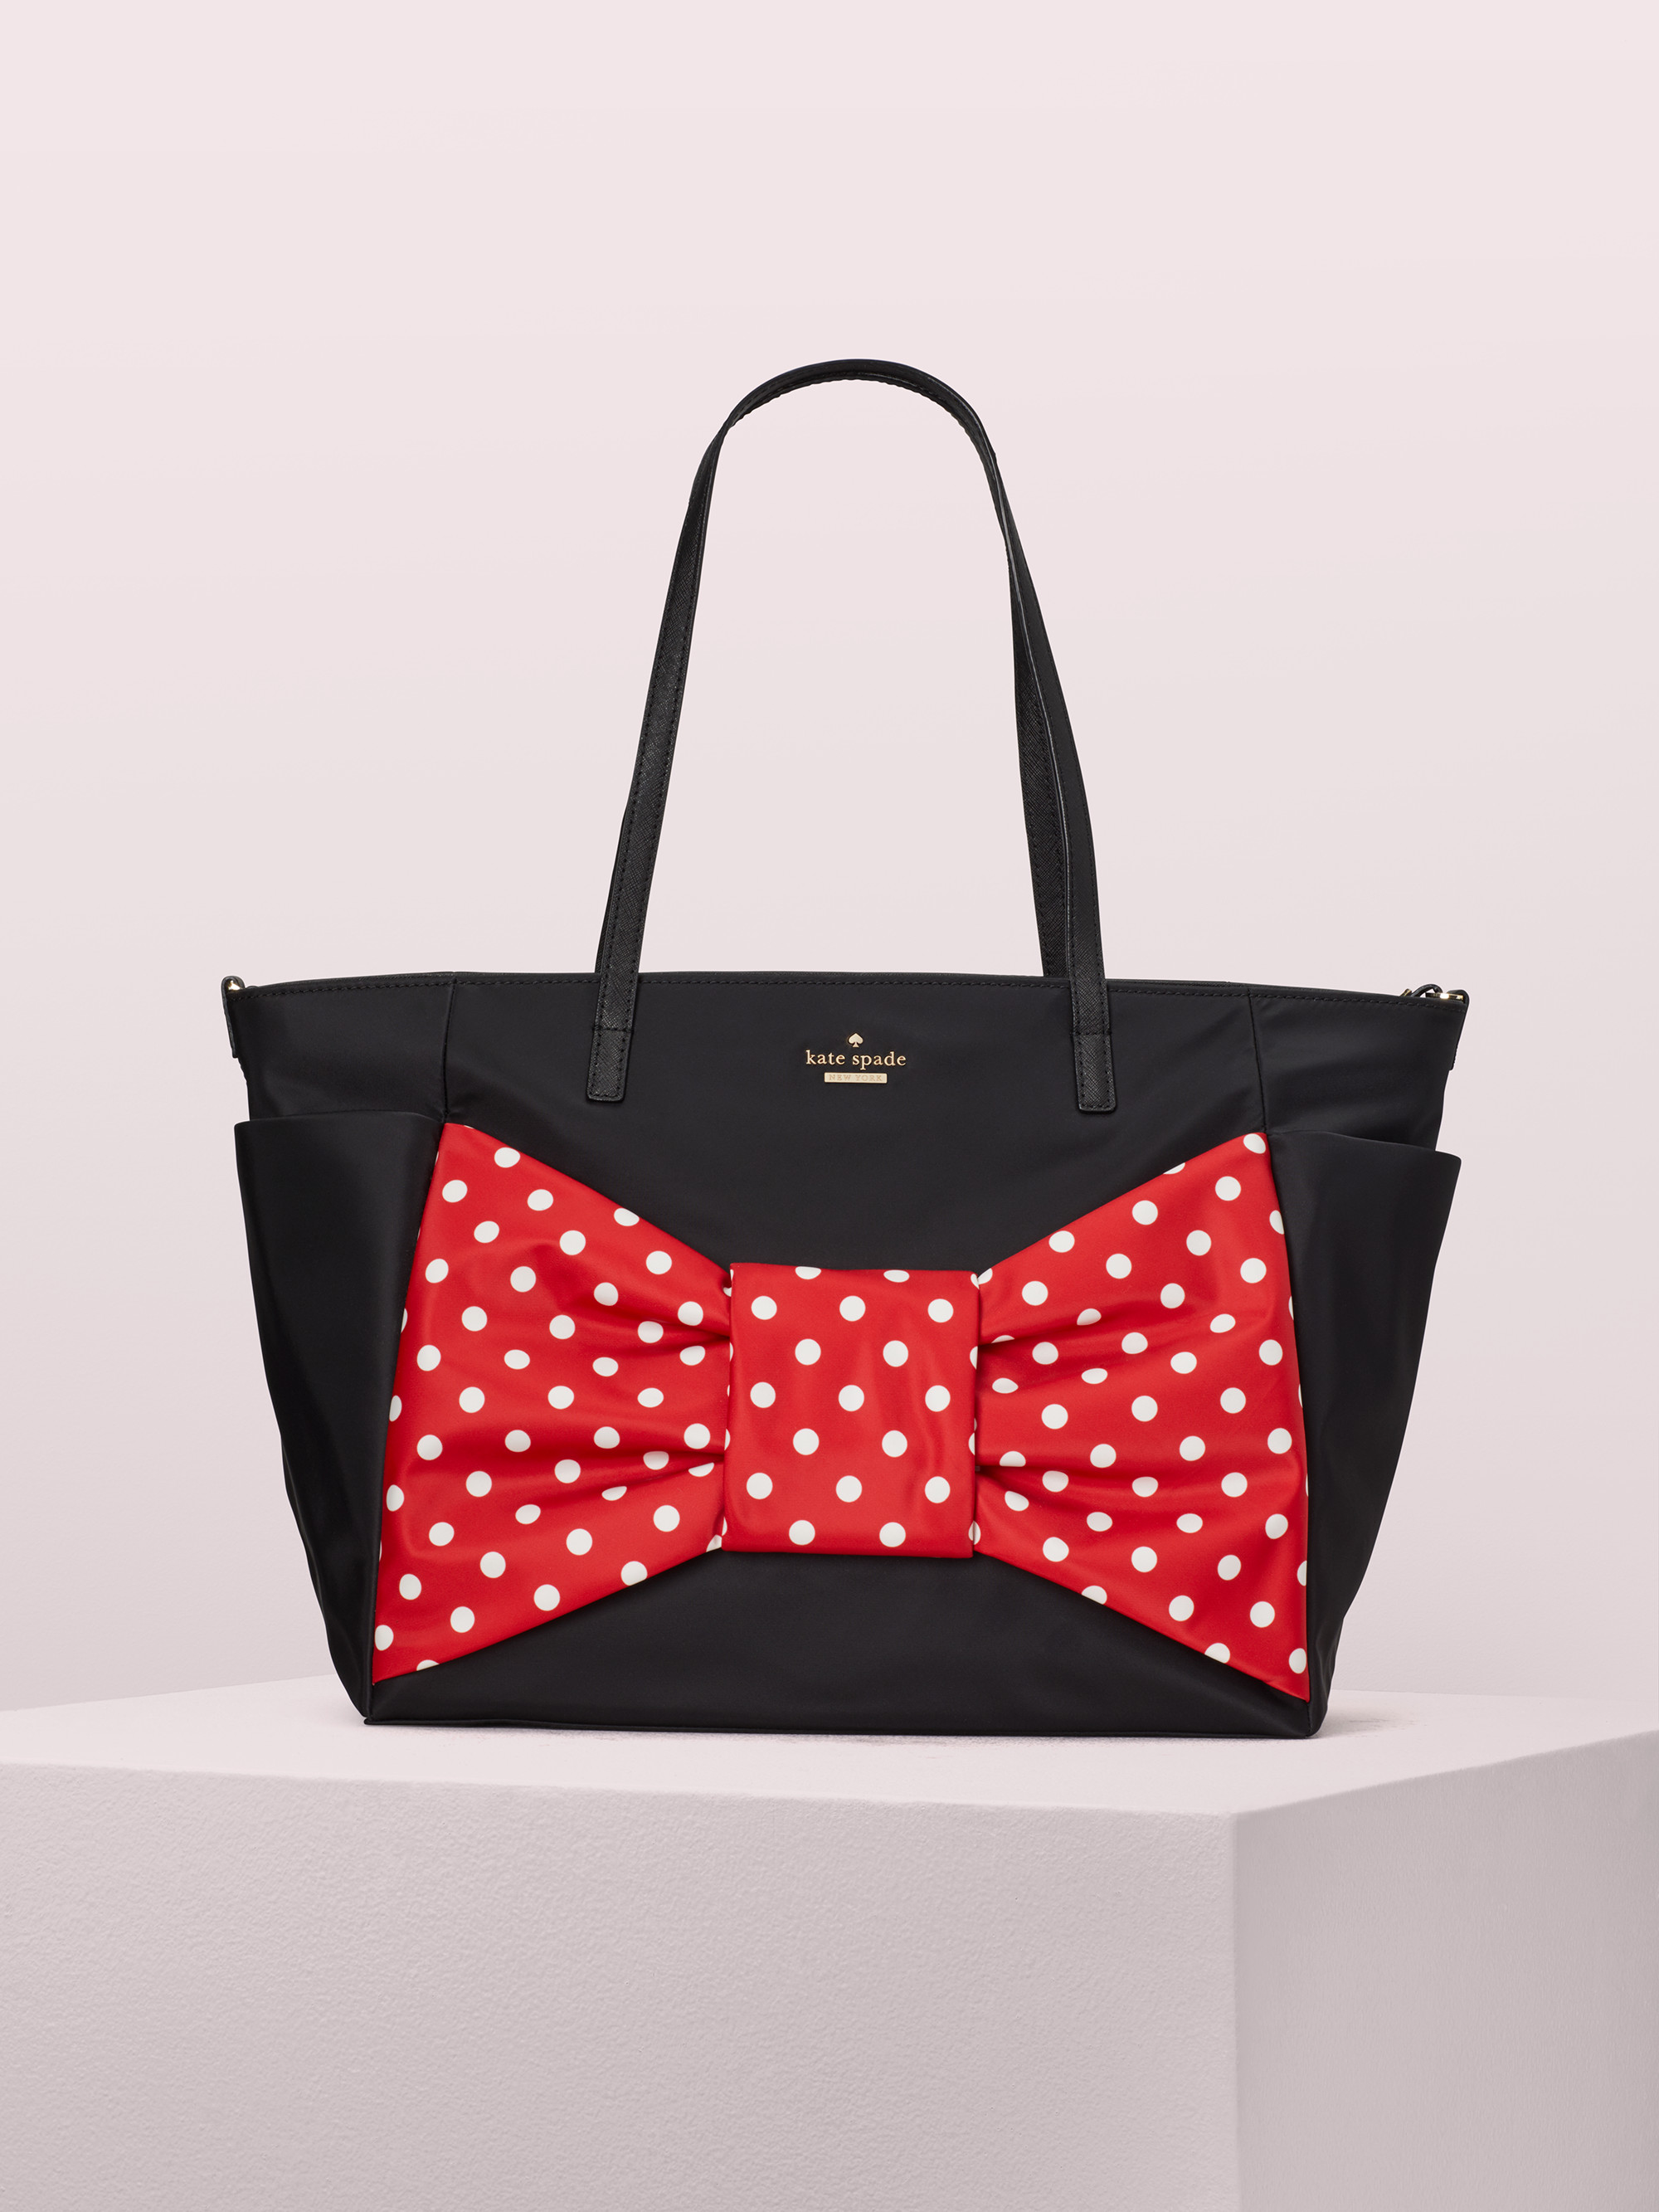 kate spade new york x minnie mouse bethany diaper bag